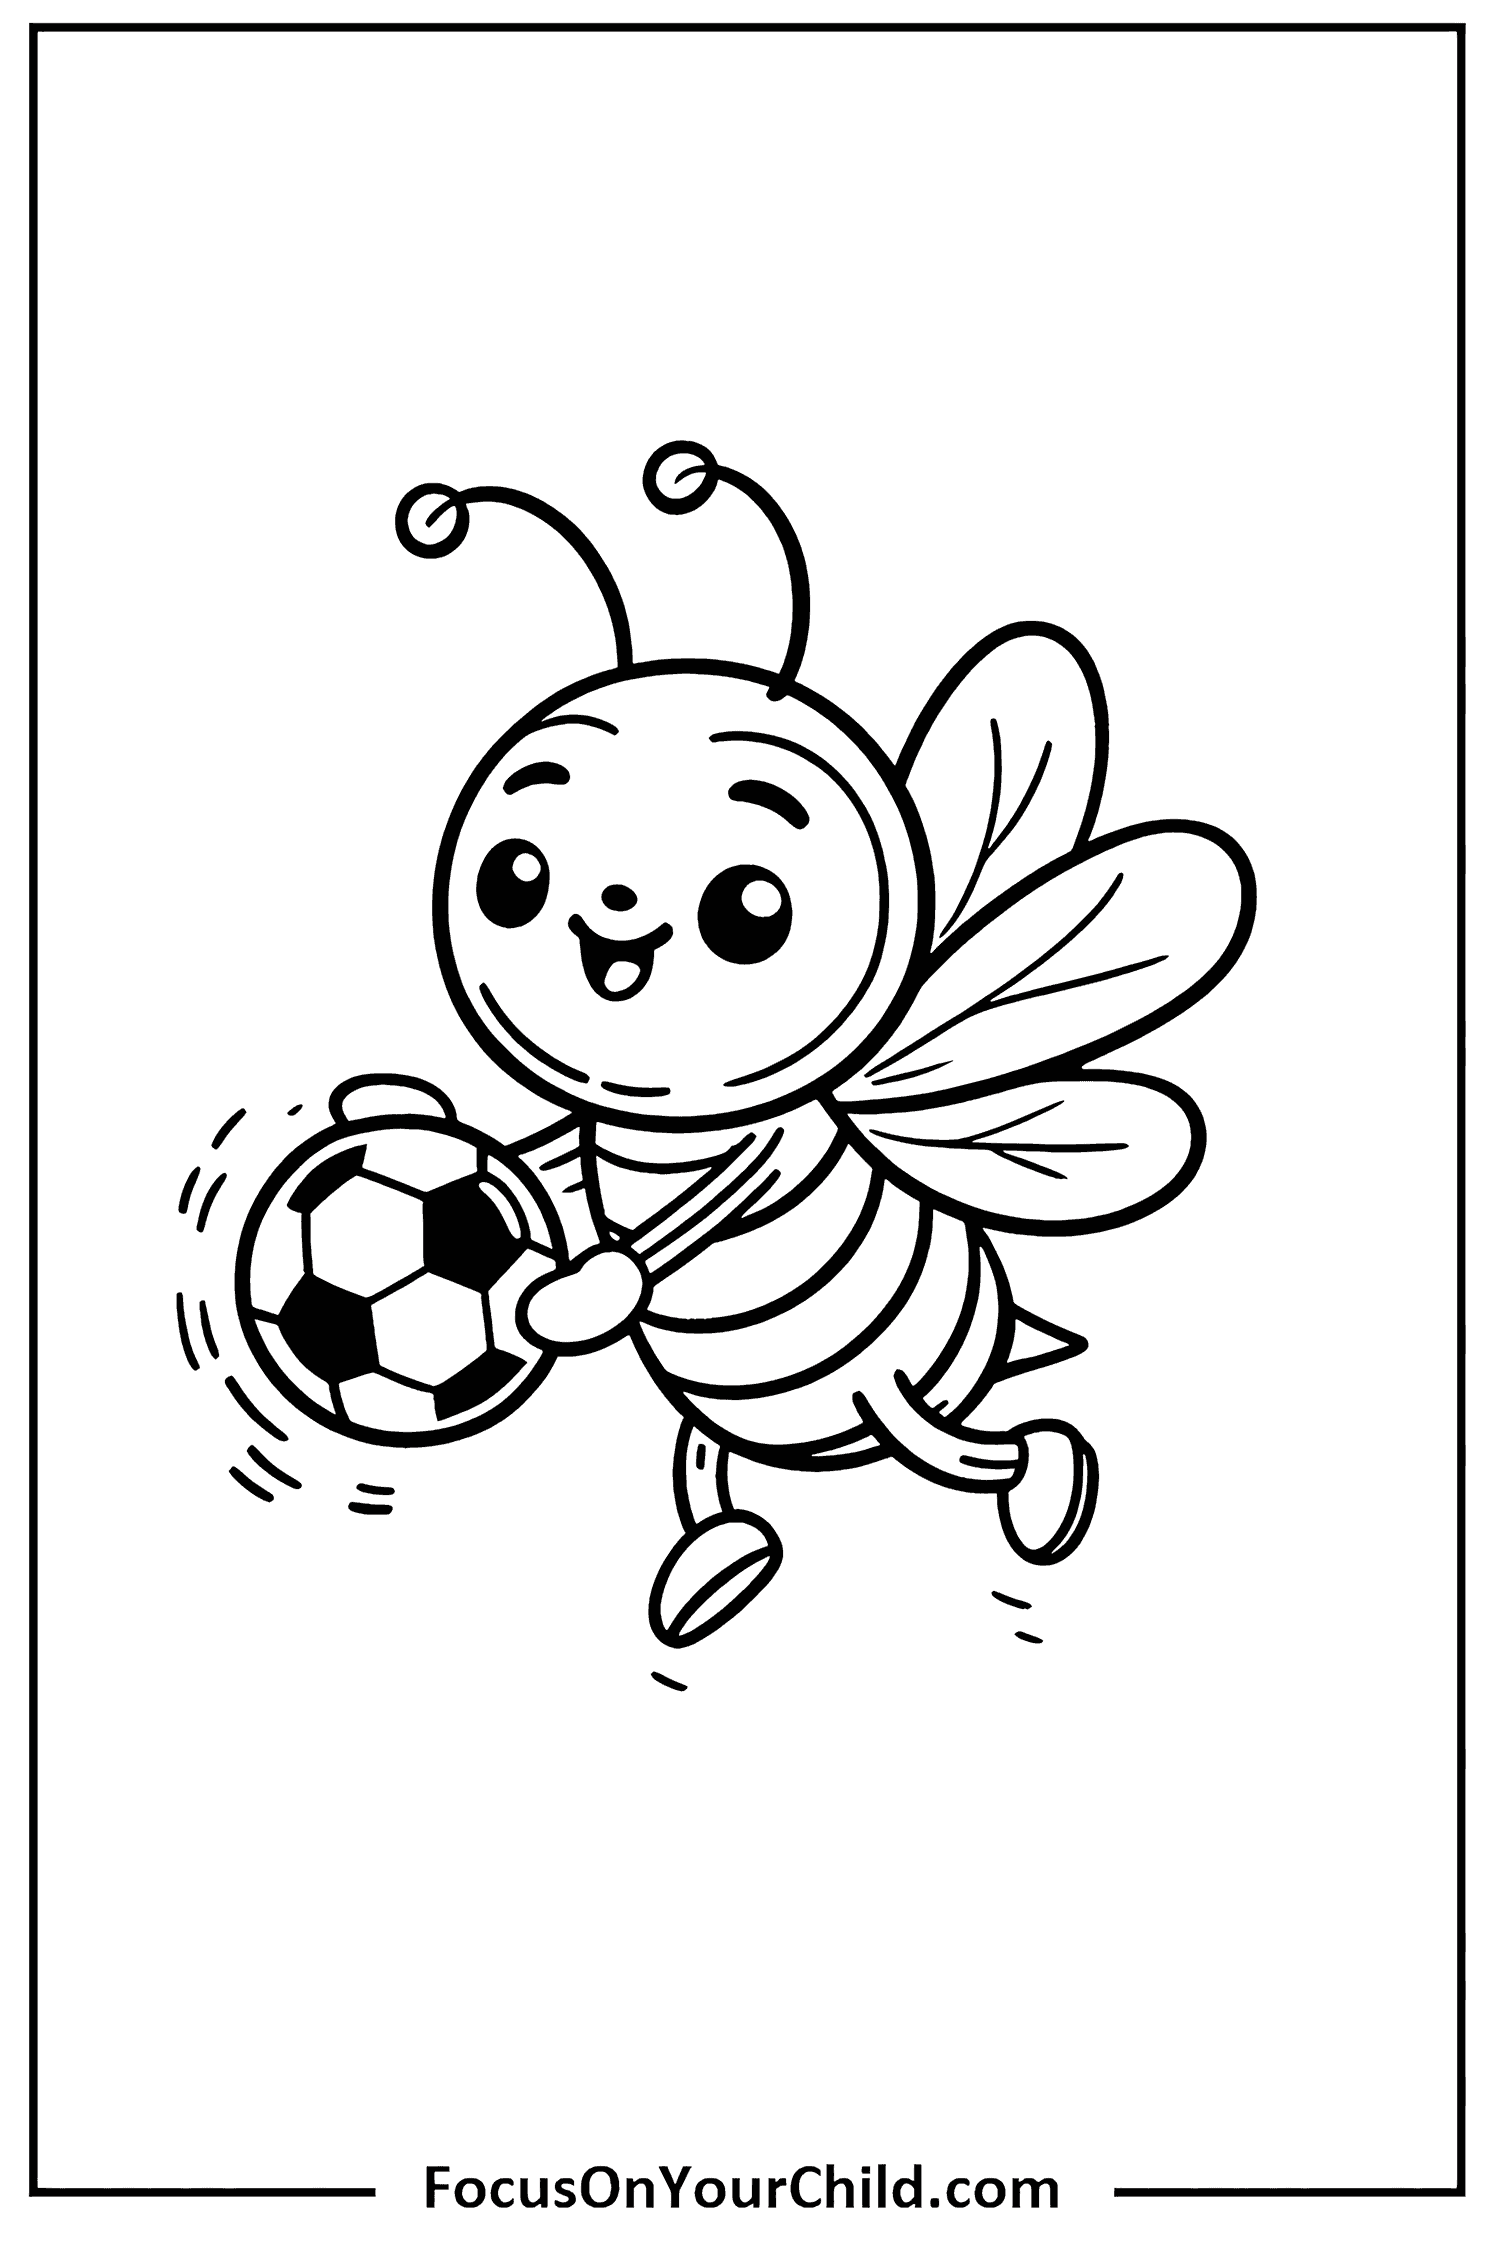 Bee playing soccer in a cheerful cartoon illustration.